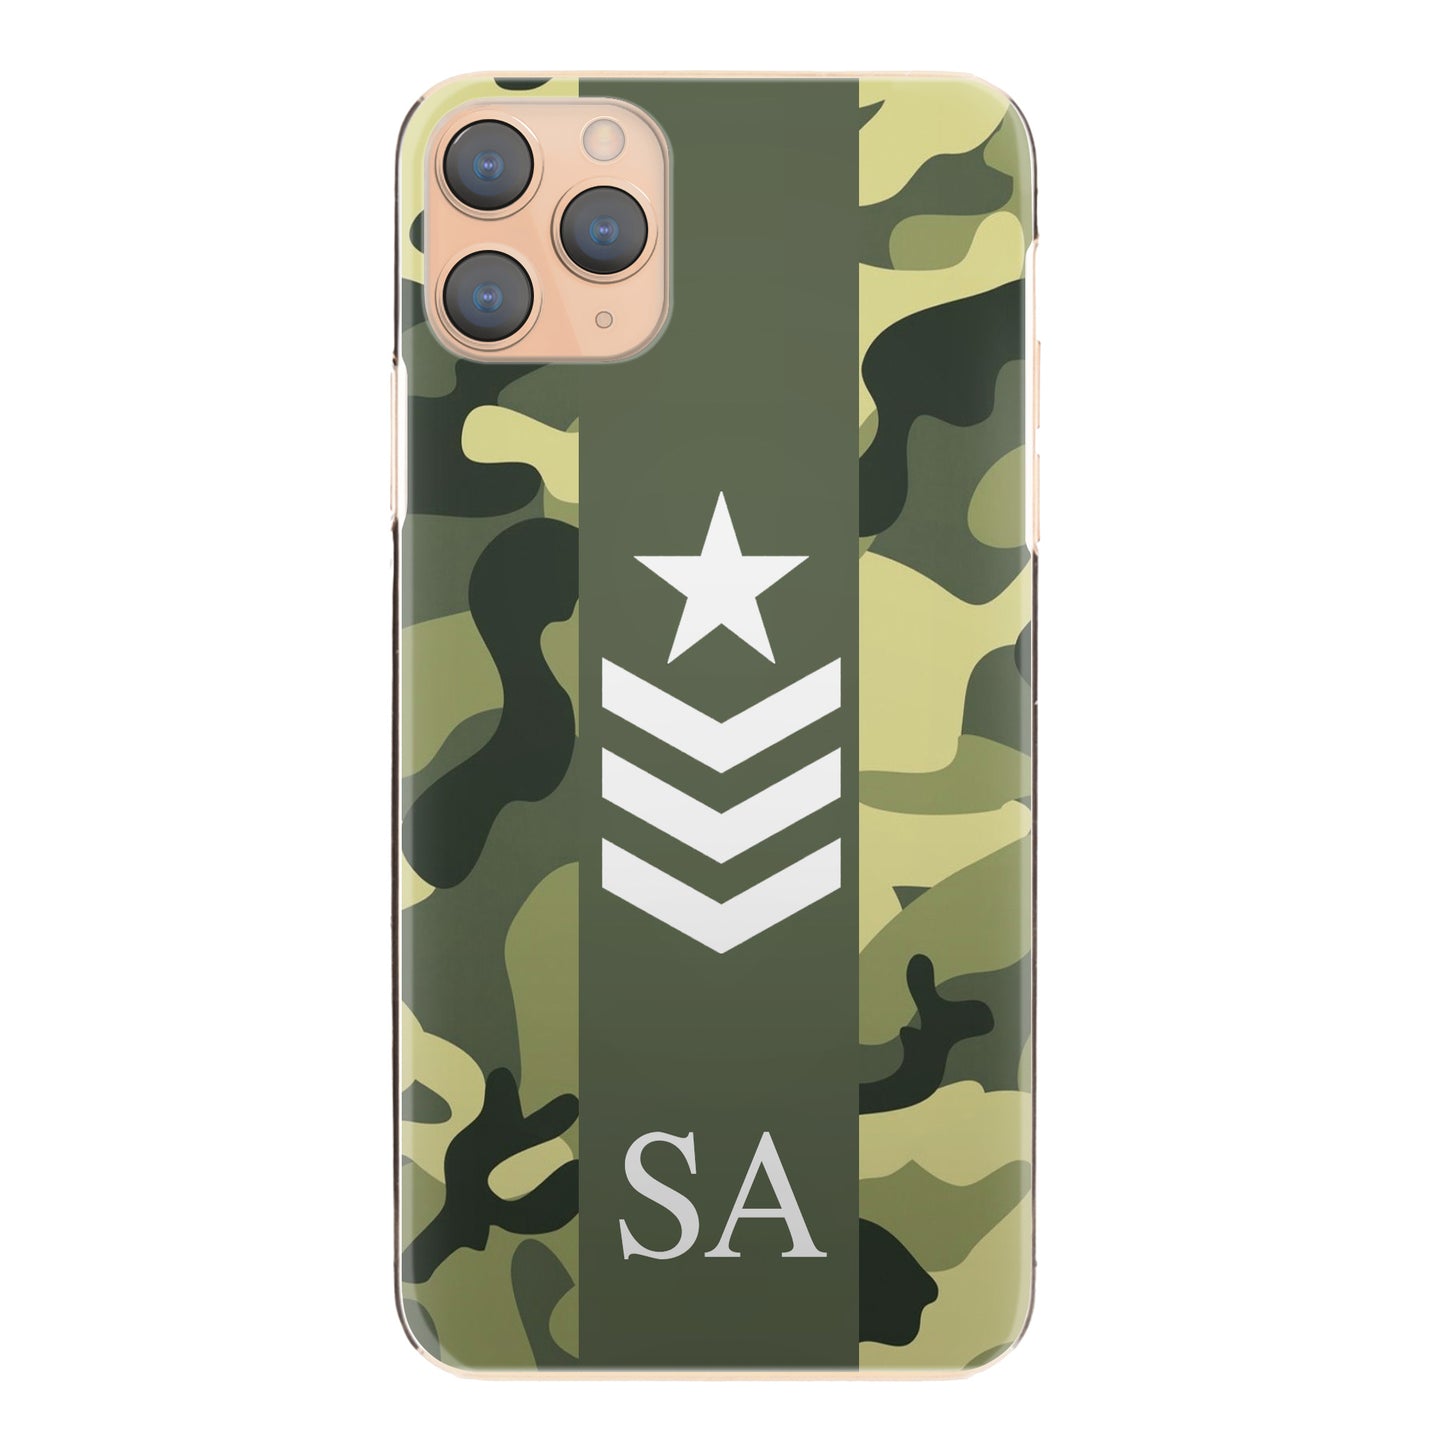 Personalised Honor Phone Hard Case with Initials and Army Rank on Classic Green Camo